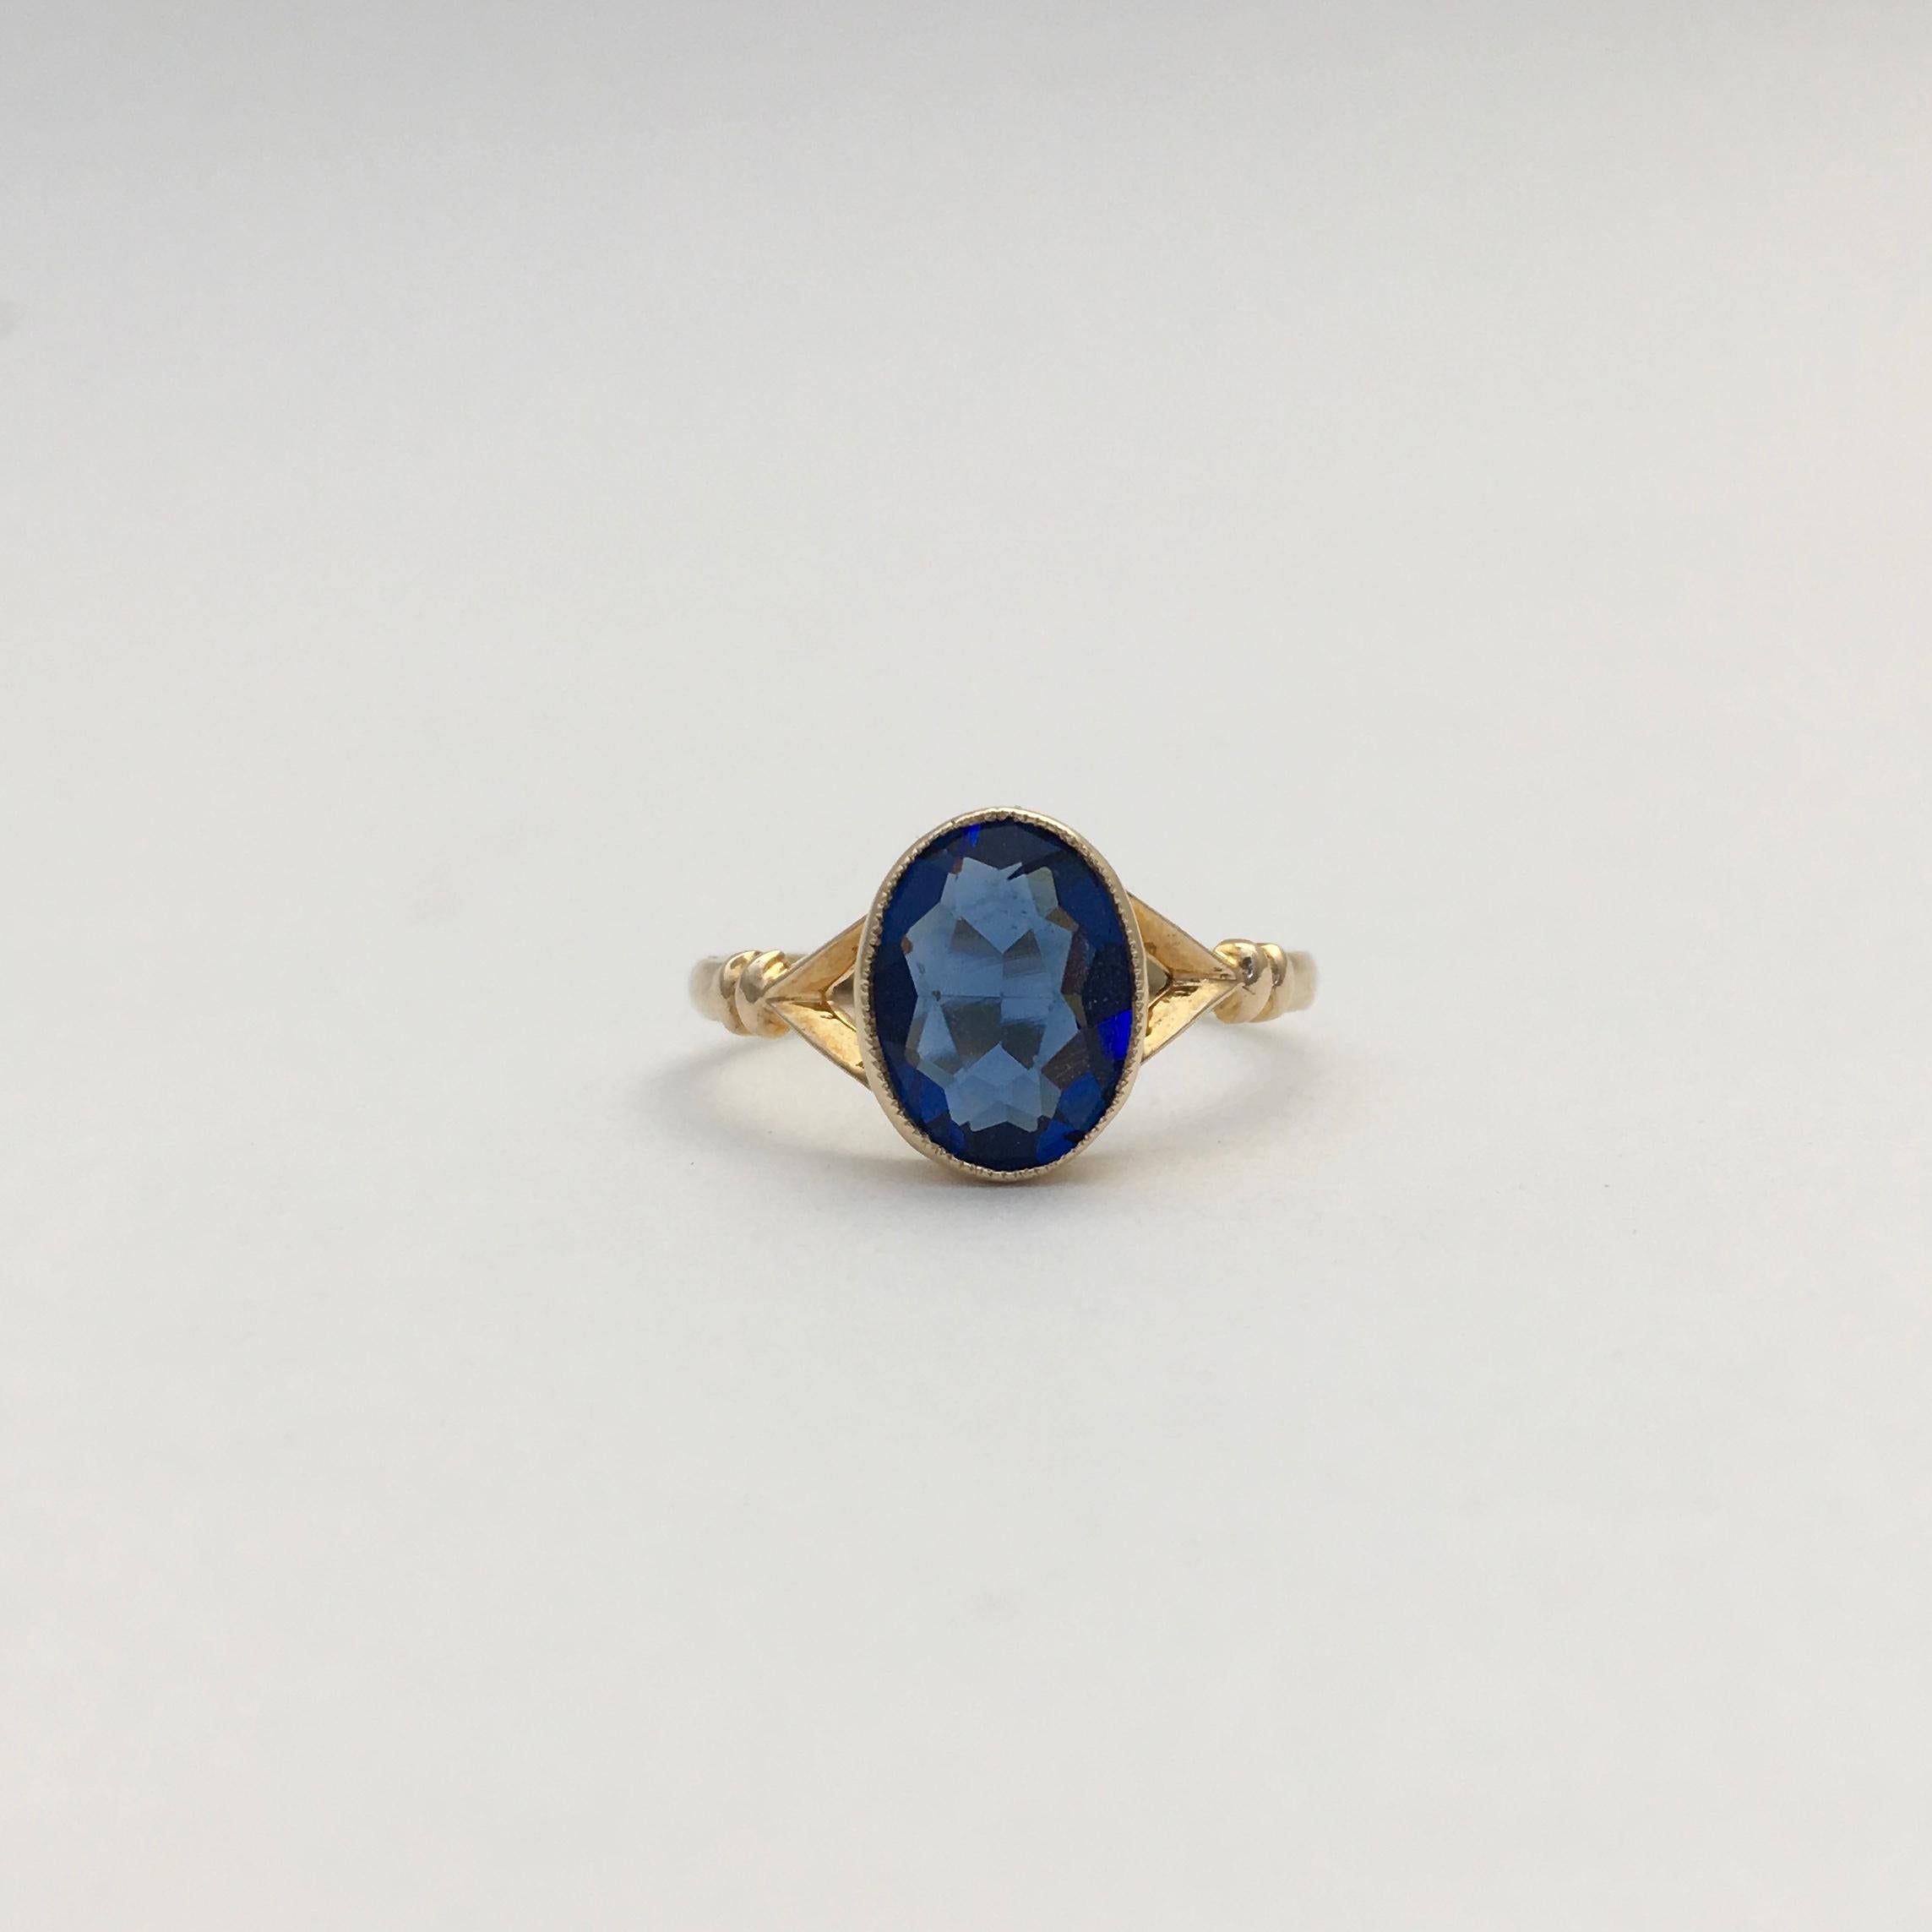 This pretty little 9ct gold ring is a striking cobalt blue colour. The dainty style dates it to the early to mid 20th century. A delicate millegrain setting surrounds the synthetic oval stone, which is made to resemble a sapphire. The stone measures